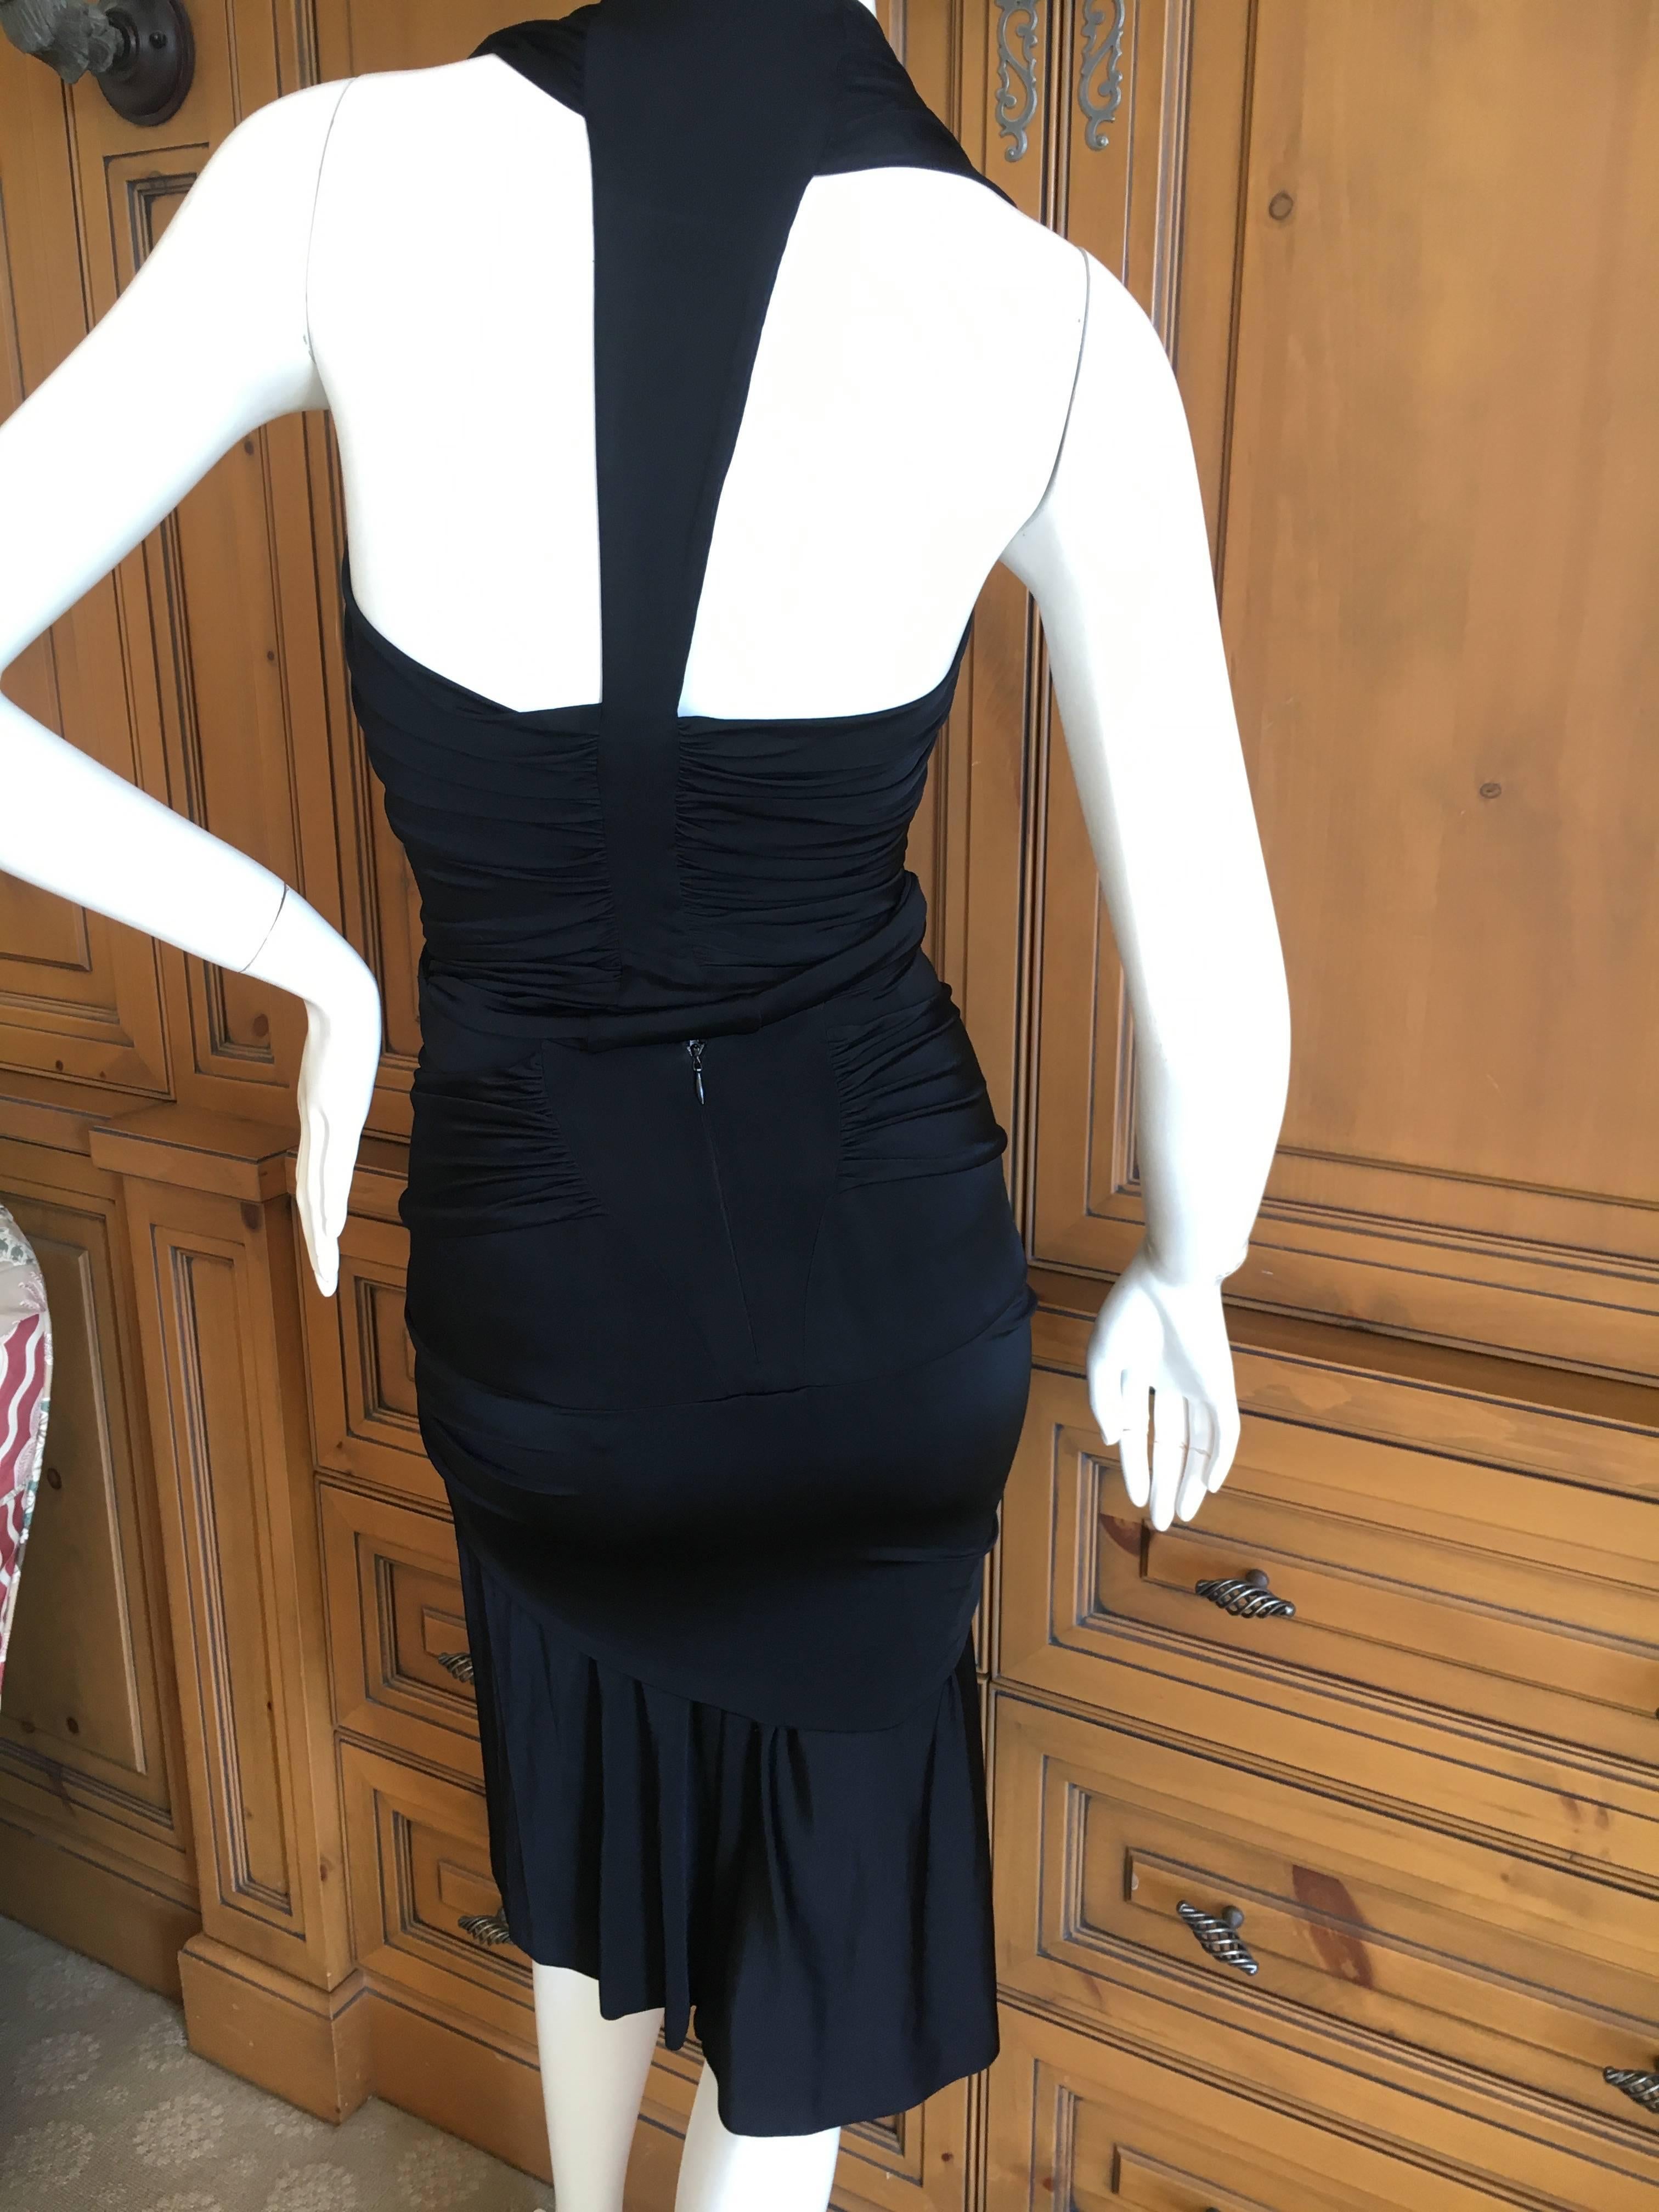 Yves Saint Laurent by Tom Ford Black Two Piece Cocktail Dress For Sale 1